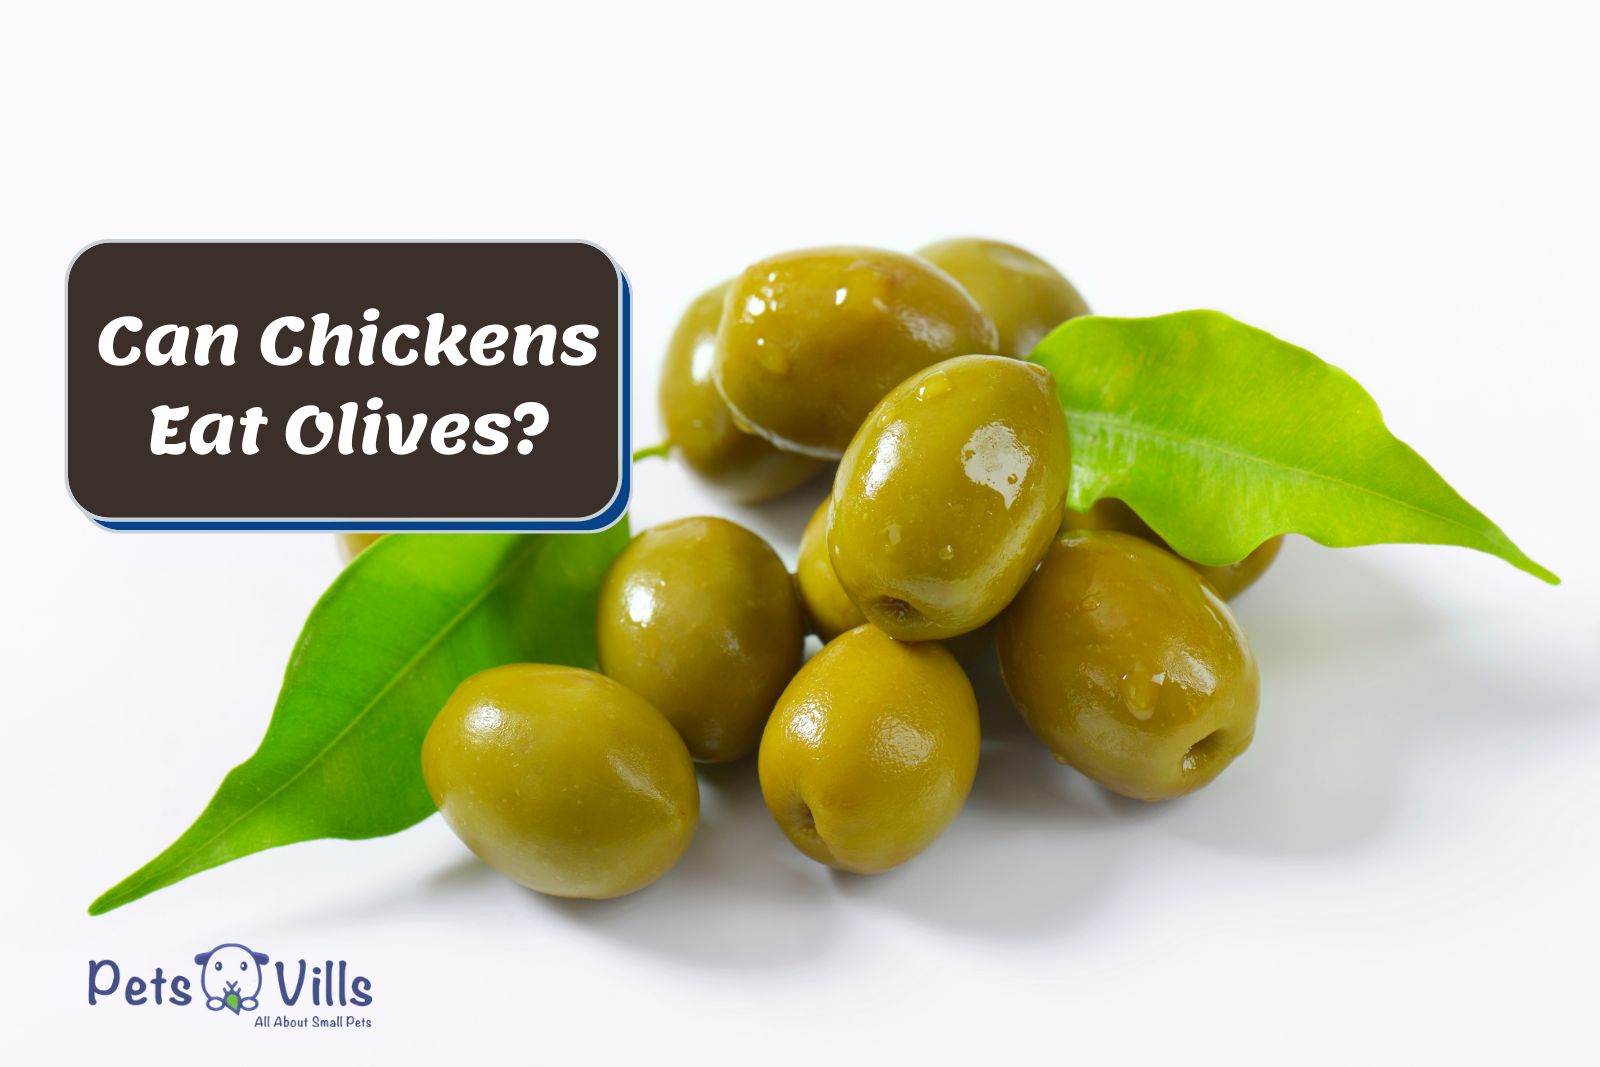 fresh olives beside "can chickens eat olives" text